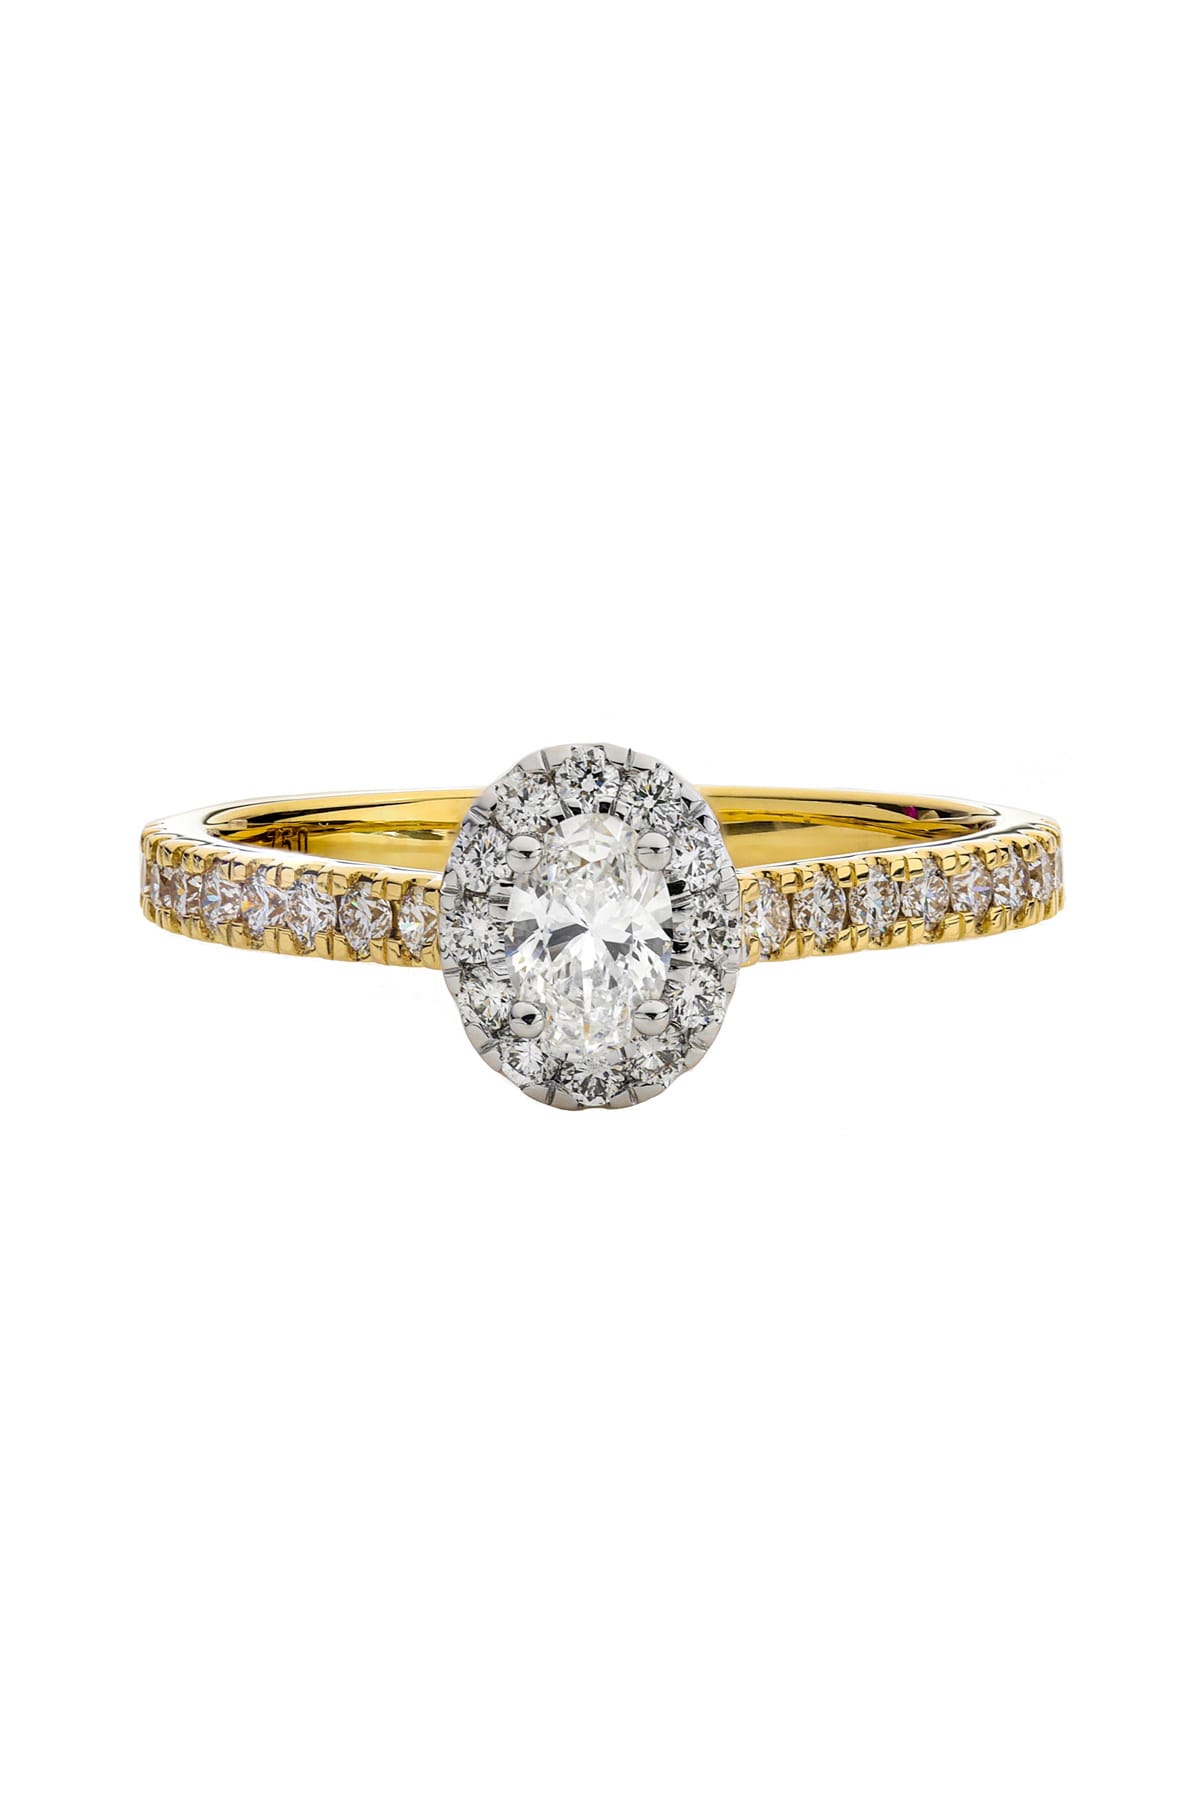 18 Carat Gold 0.25ct Oval Diamond Halo Engagement Ring available at LeGassick Diamonds and Jewellery Gold Coast, Australia.